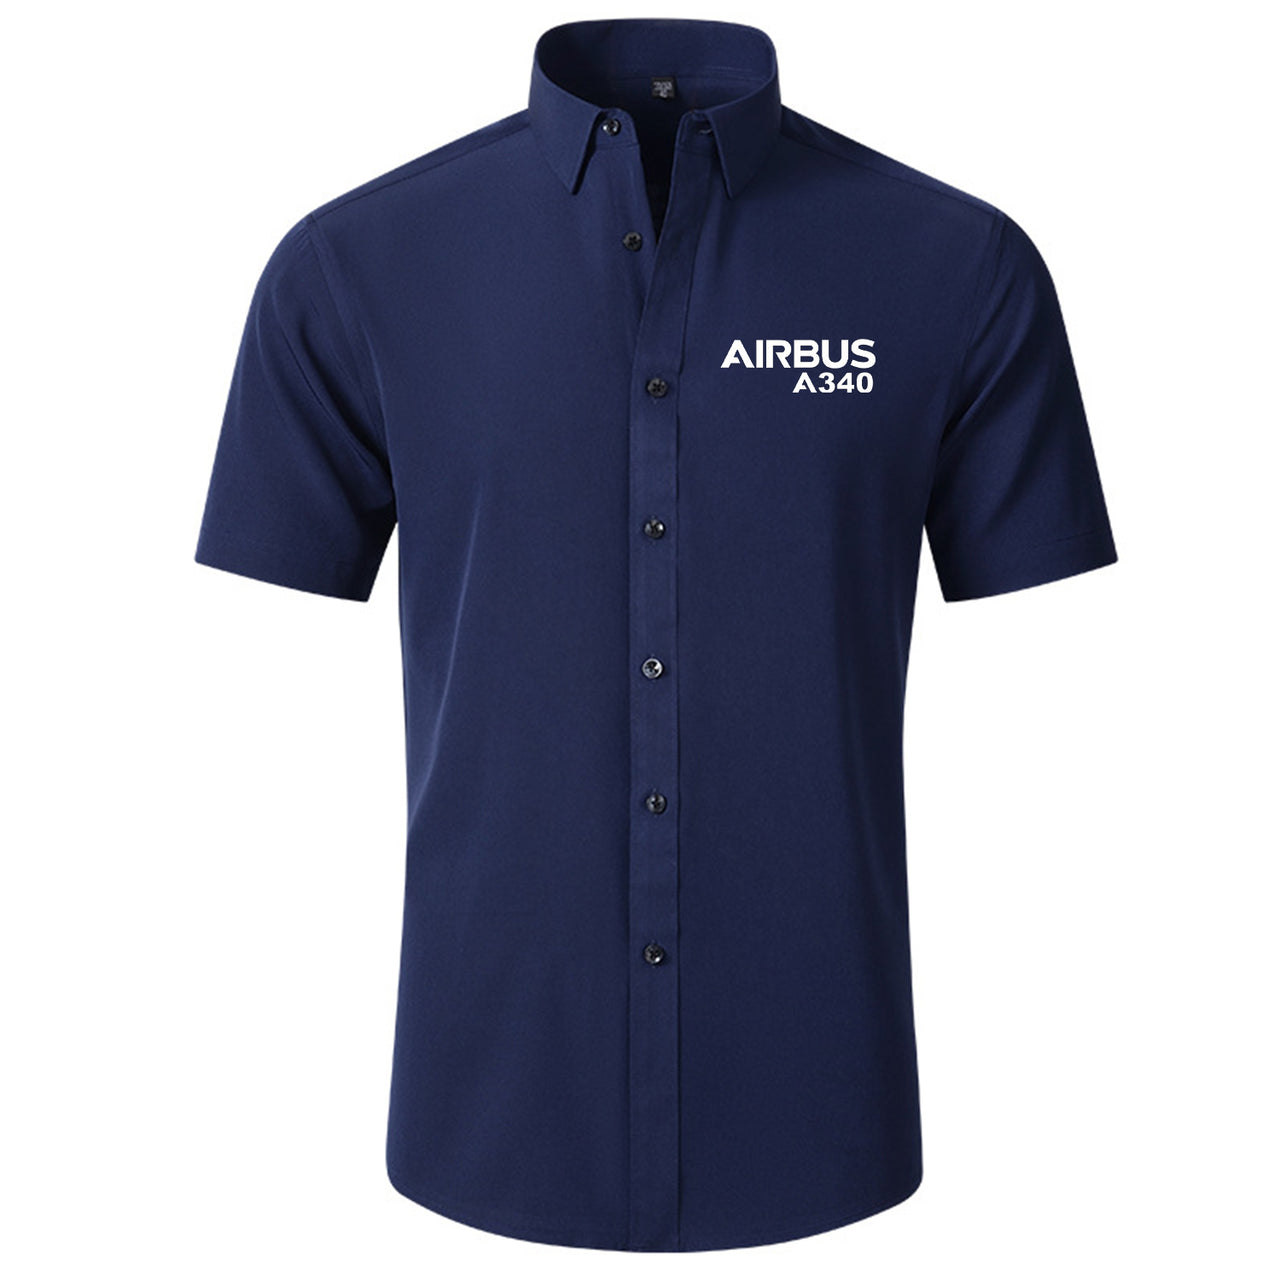 Airbus A340 & Text Designed Short Sleeve Shirts